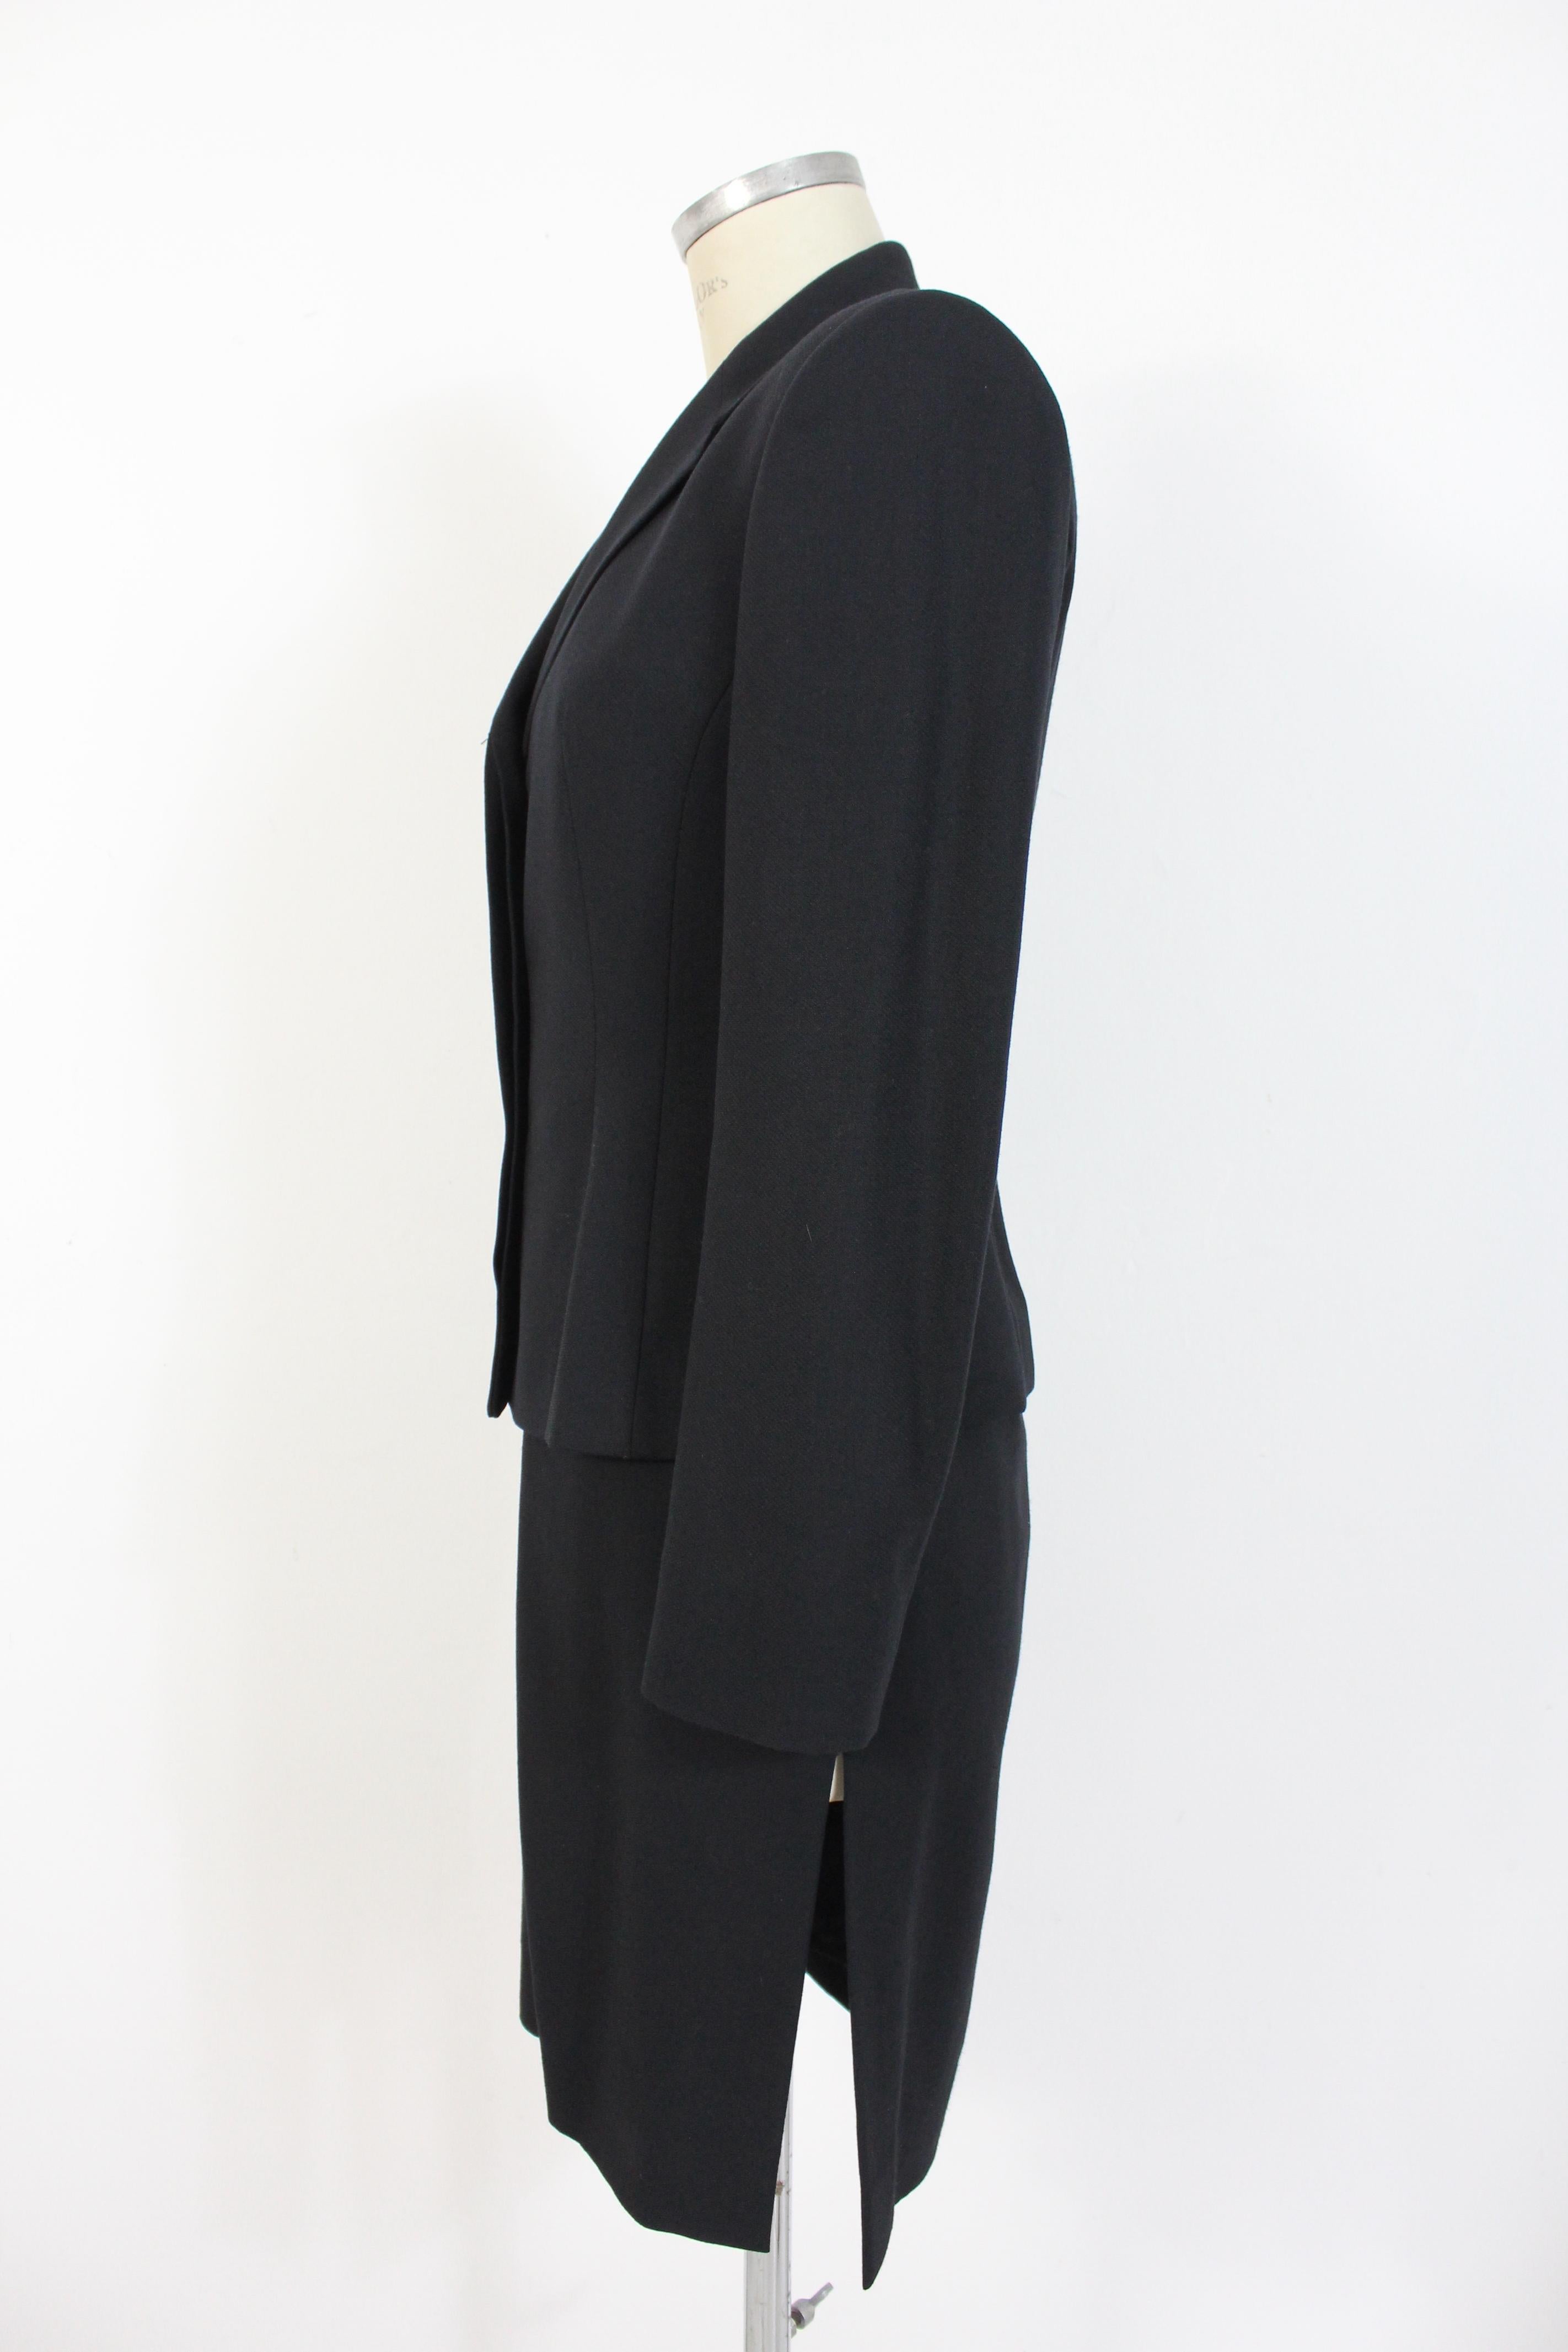 Gianfranco Ferre Black Wool Evening Suit Dress In Excellent Condition In Brindisi, Bt